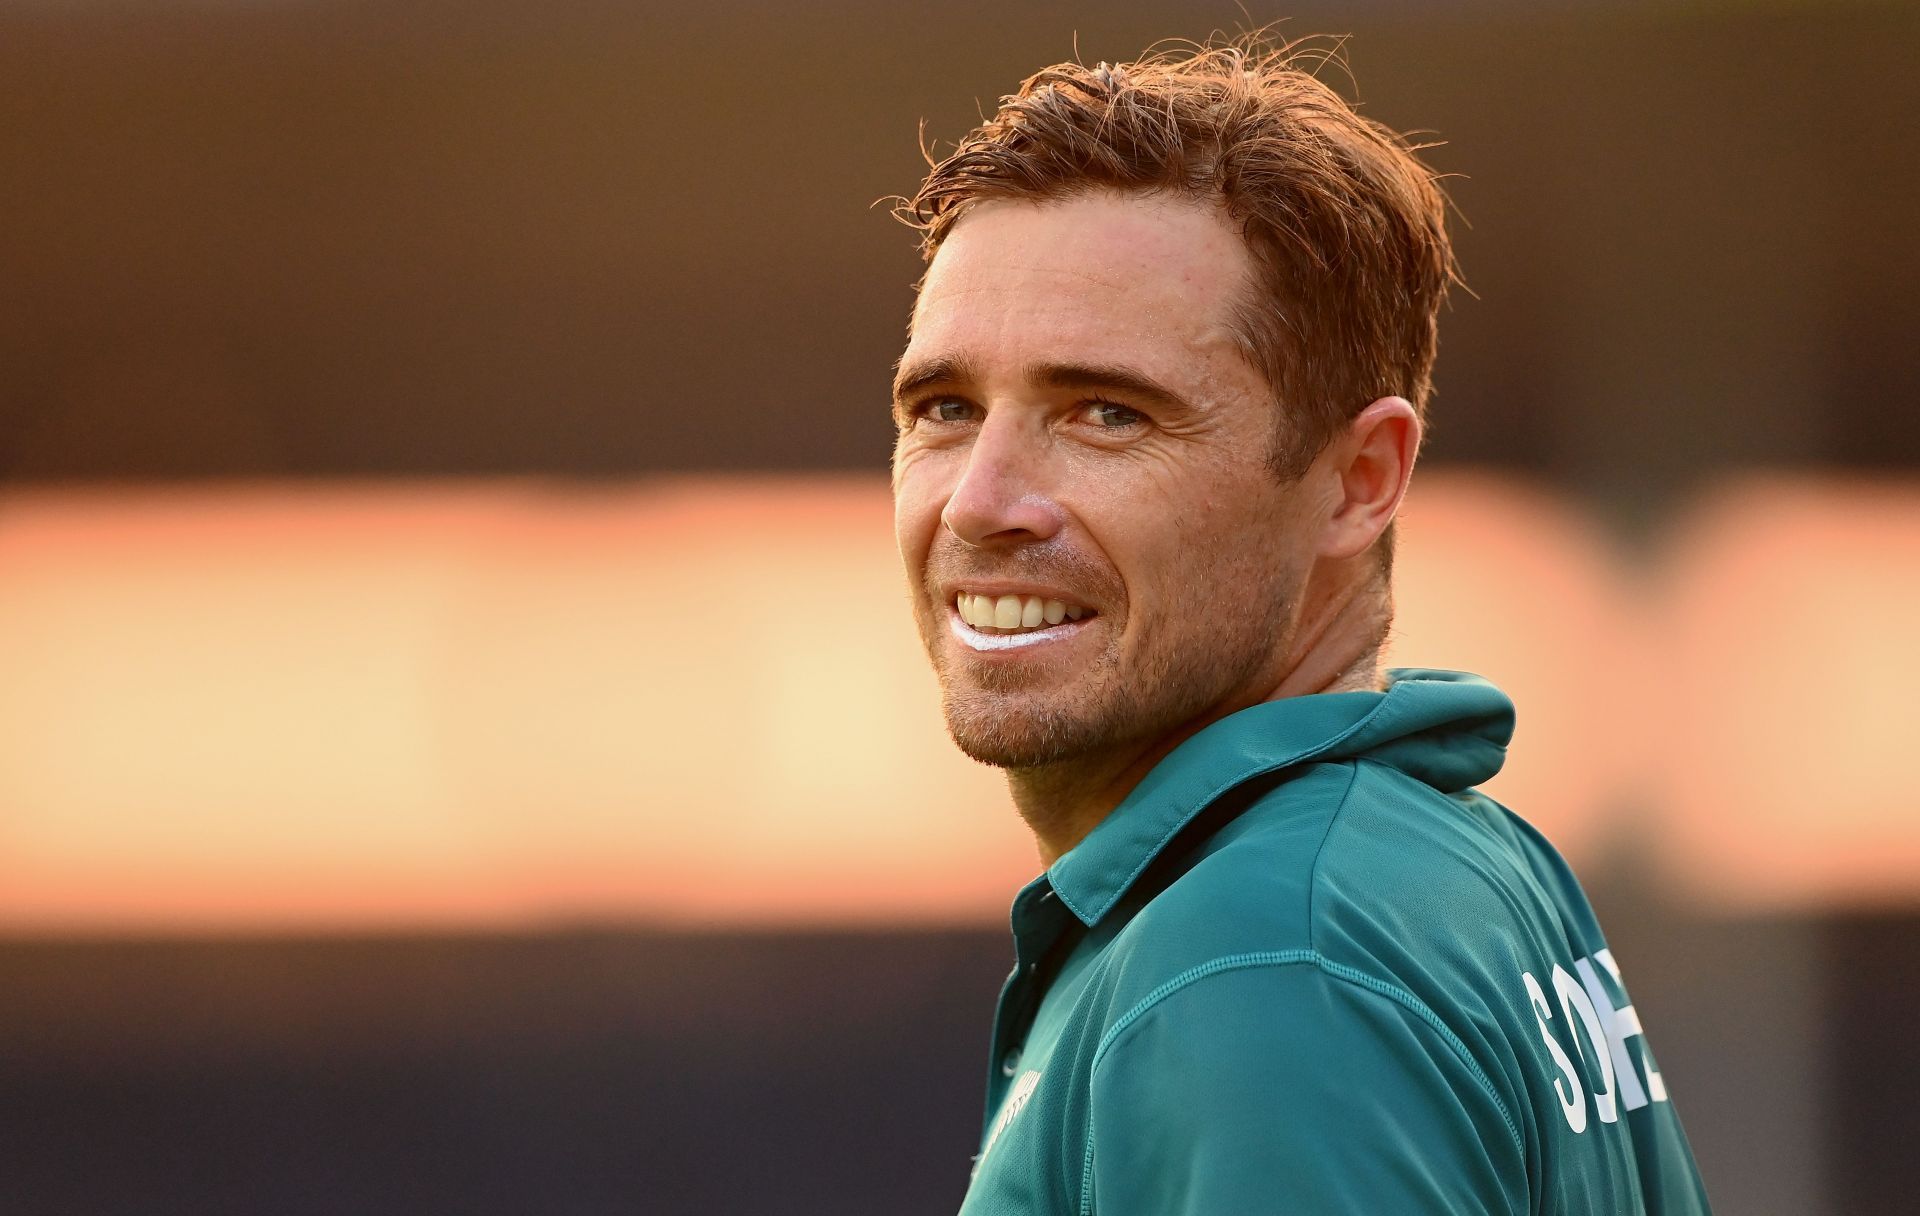 Tim Southee. (Image Credits: Getty)